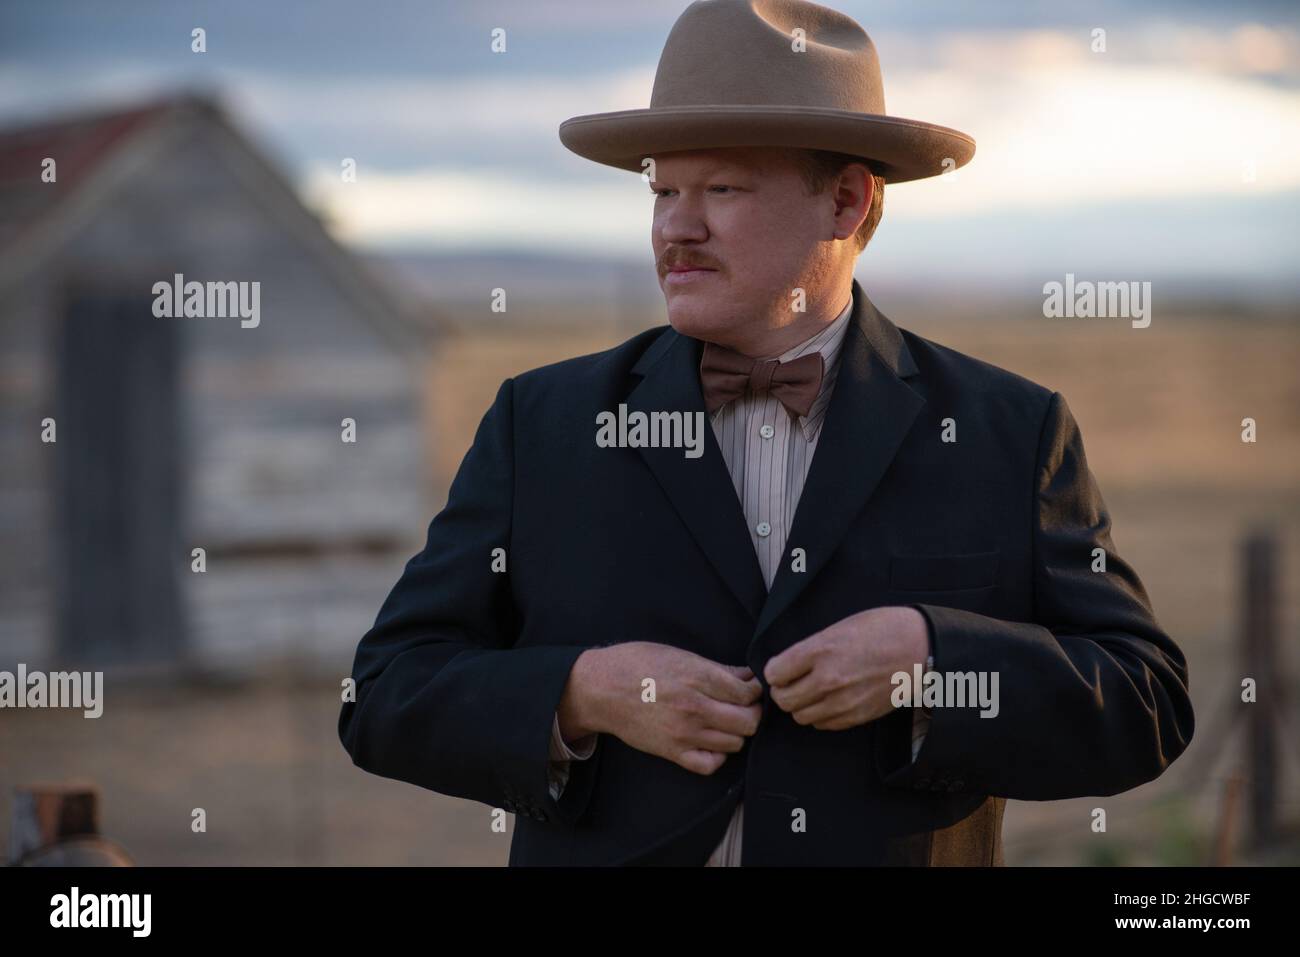 JESSE PLEMONS in THE POWER OF THE DOG (2021), directed by JANE CAMPION. Credit: SEE-SAW FILMS / Album Stock Photo